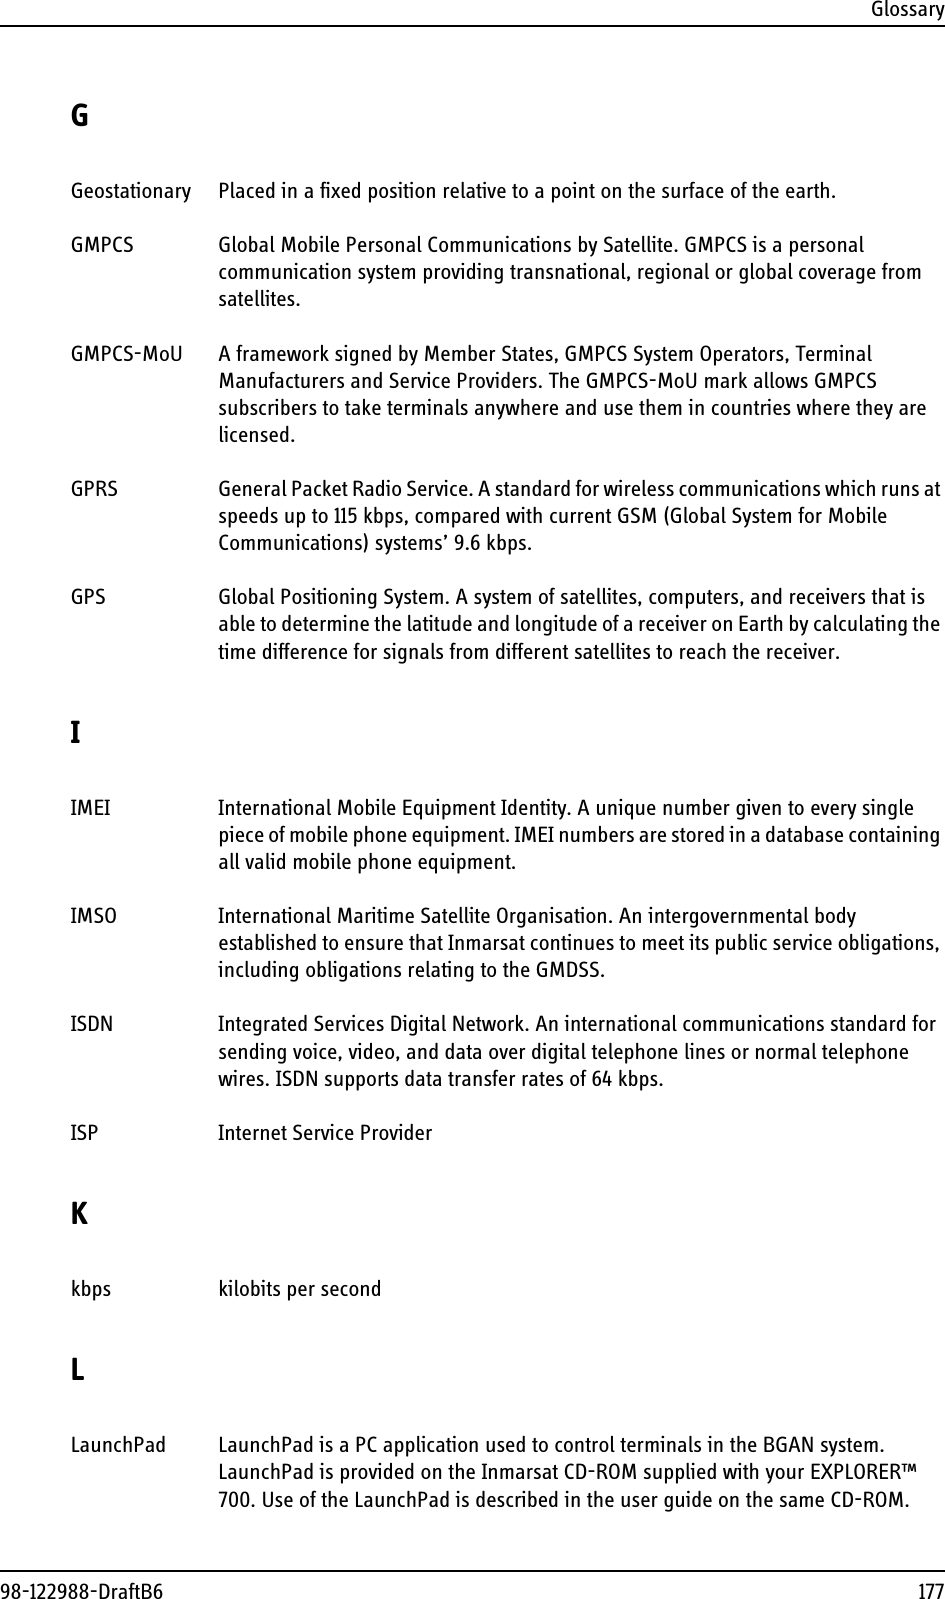 Glossary98-122988-DraftB6 177GGeostationary Placed in a fixed position relative to a point on the surface of the earth. GMPCS Global Mobile Personal Communications by Satellite. GMPCS is a personal communication system providing transnational, regional or global coverage from satellites. GMPCS-MoU A framework signed by Member States, GMPCS System Operators, Terminal Manufacturers and Service Providers. The GMPCS-MoU mark allows GMPCS subscribers to take terminals anywhere and use them in countries where they are licensed. GPRS General Packet Radio Service. A standard for wireless communications which runs at speeds up to 115 kbps, compared with current GSM (Global System for Mobile Communications) systems’ 9.6 kbps. GPS Global Positioning System. A system of satellites, computers, and receivers that is able to determine the latitude and longitude of a receiver on Earth by calculating the time difference for signals from different satellites to reach the receiver. IIMEI International Mobile Equipment Identity. A unique number given to every single piece of mobile phone equipment. IMEI numbers are stored in a database containing all valid mobile phone equipment. IMSO International Maritime Satellite Organisation. An intergovernmental body established to ensure that Inmarsat continues to meet its public service obligations, including obligations relating to the GMDSS. ISDN Integrated Services Digital Network. An international communications standard for sending voice, video, and data over digital telephone lines or normal telephone wires. ISDN supports data transfer rates of 64 kbps. ISP Internet Service Provider Kkbps kilobits per second LLaunchPad LaunchPad is a PC application used to control terminals in the BGAN system. LaunchPad is provided on the Inmarsat CD-ROM supplied with your EXPLORER™ 700. Use of the LaunchPad is described in the user guide on the same CD-ROM. 